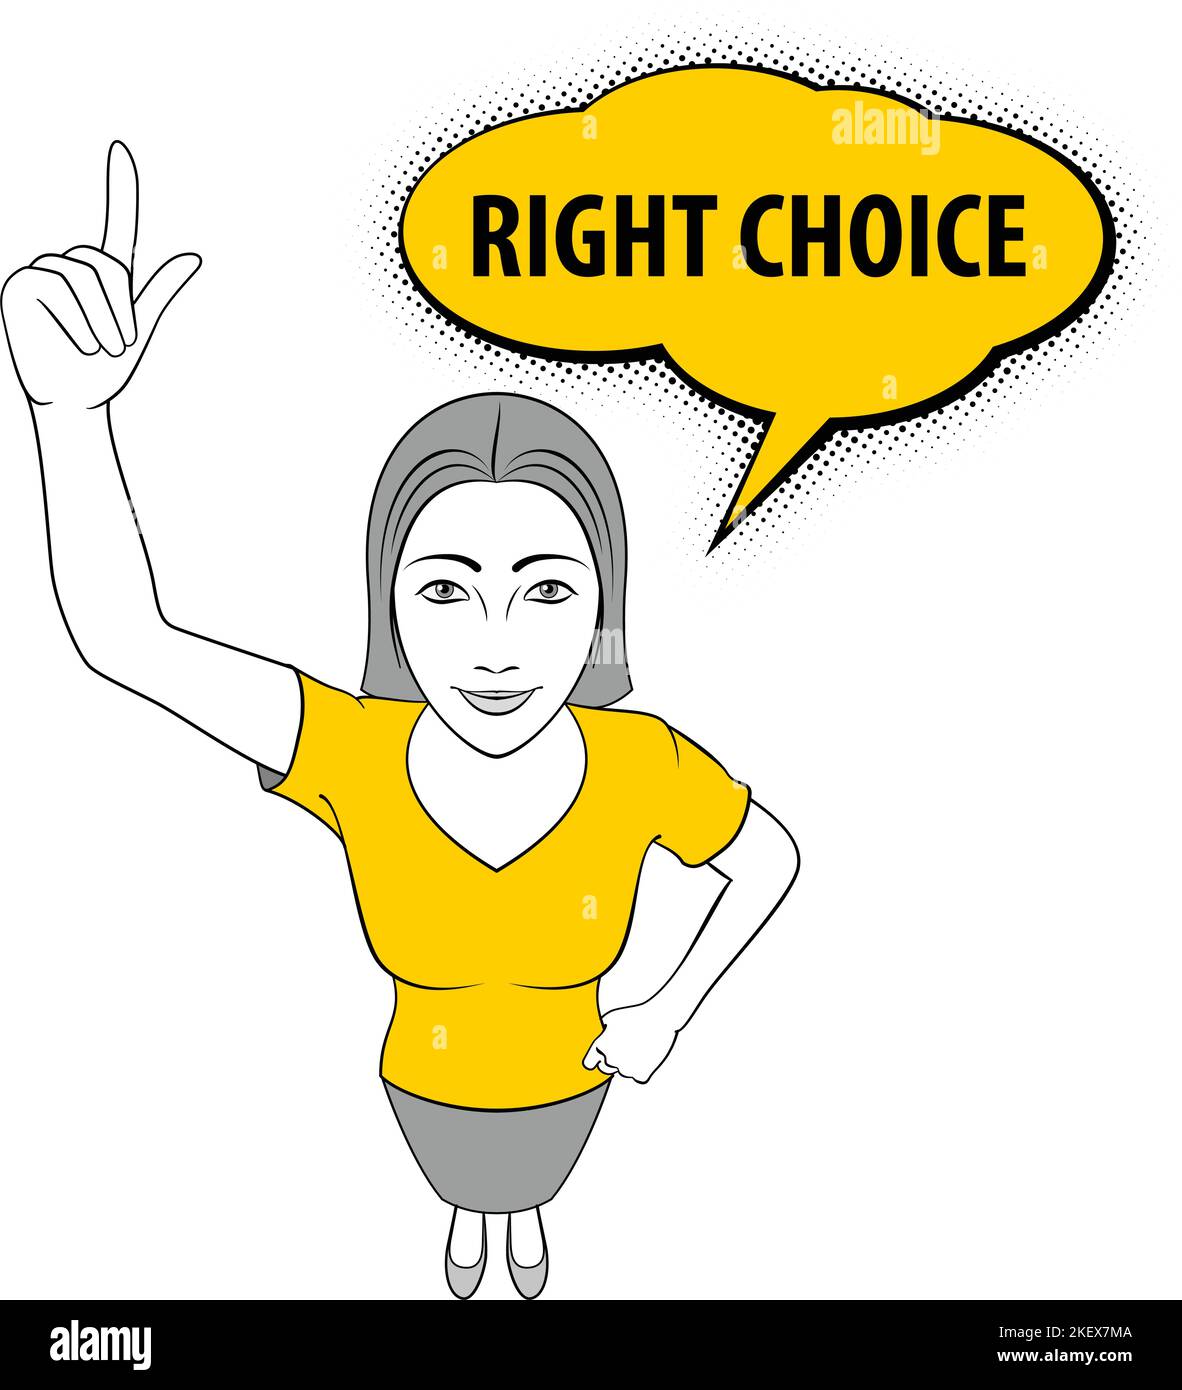 Cartoon Illustration of a Young Woman Giving a Thumbs Up. Right Choice Stock Vector